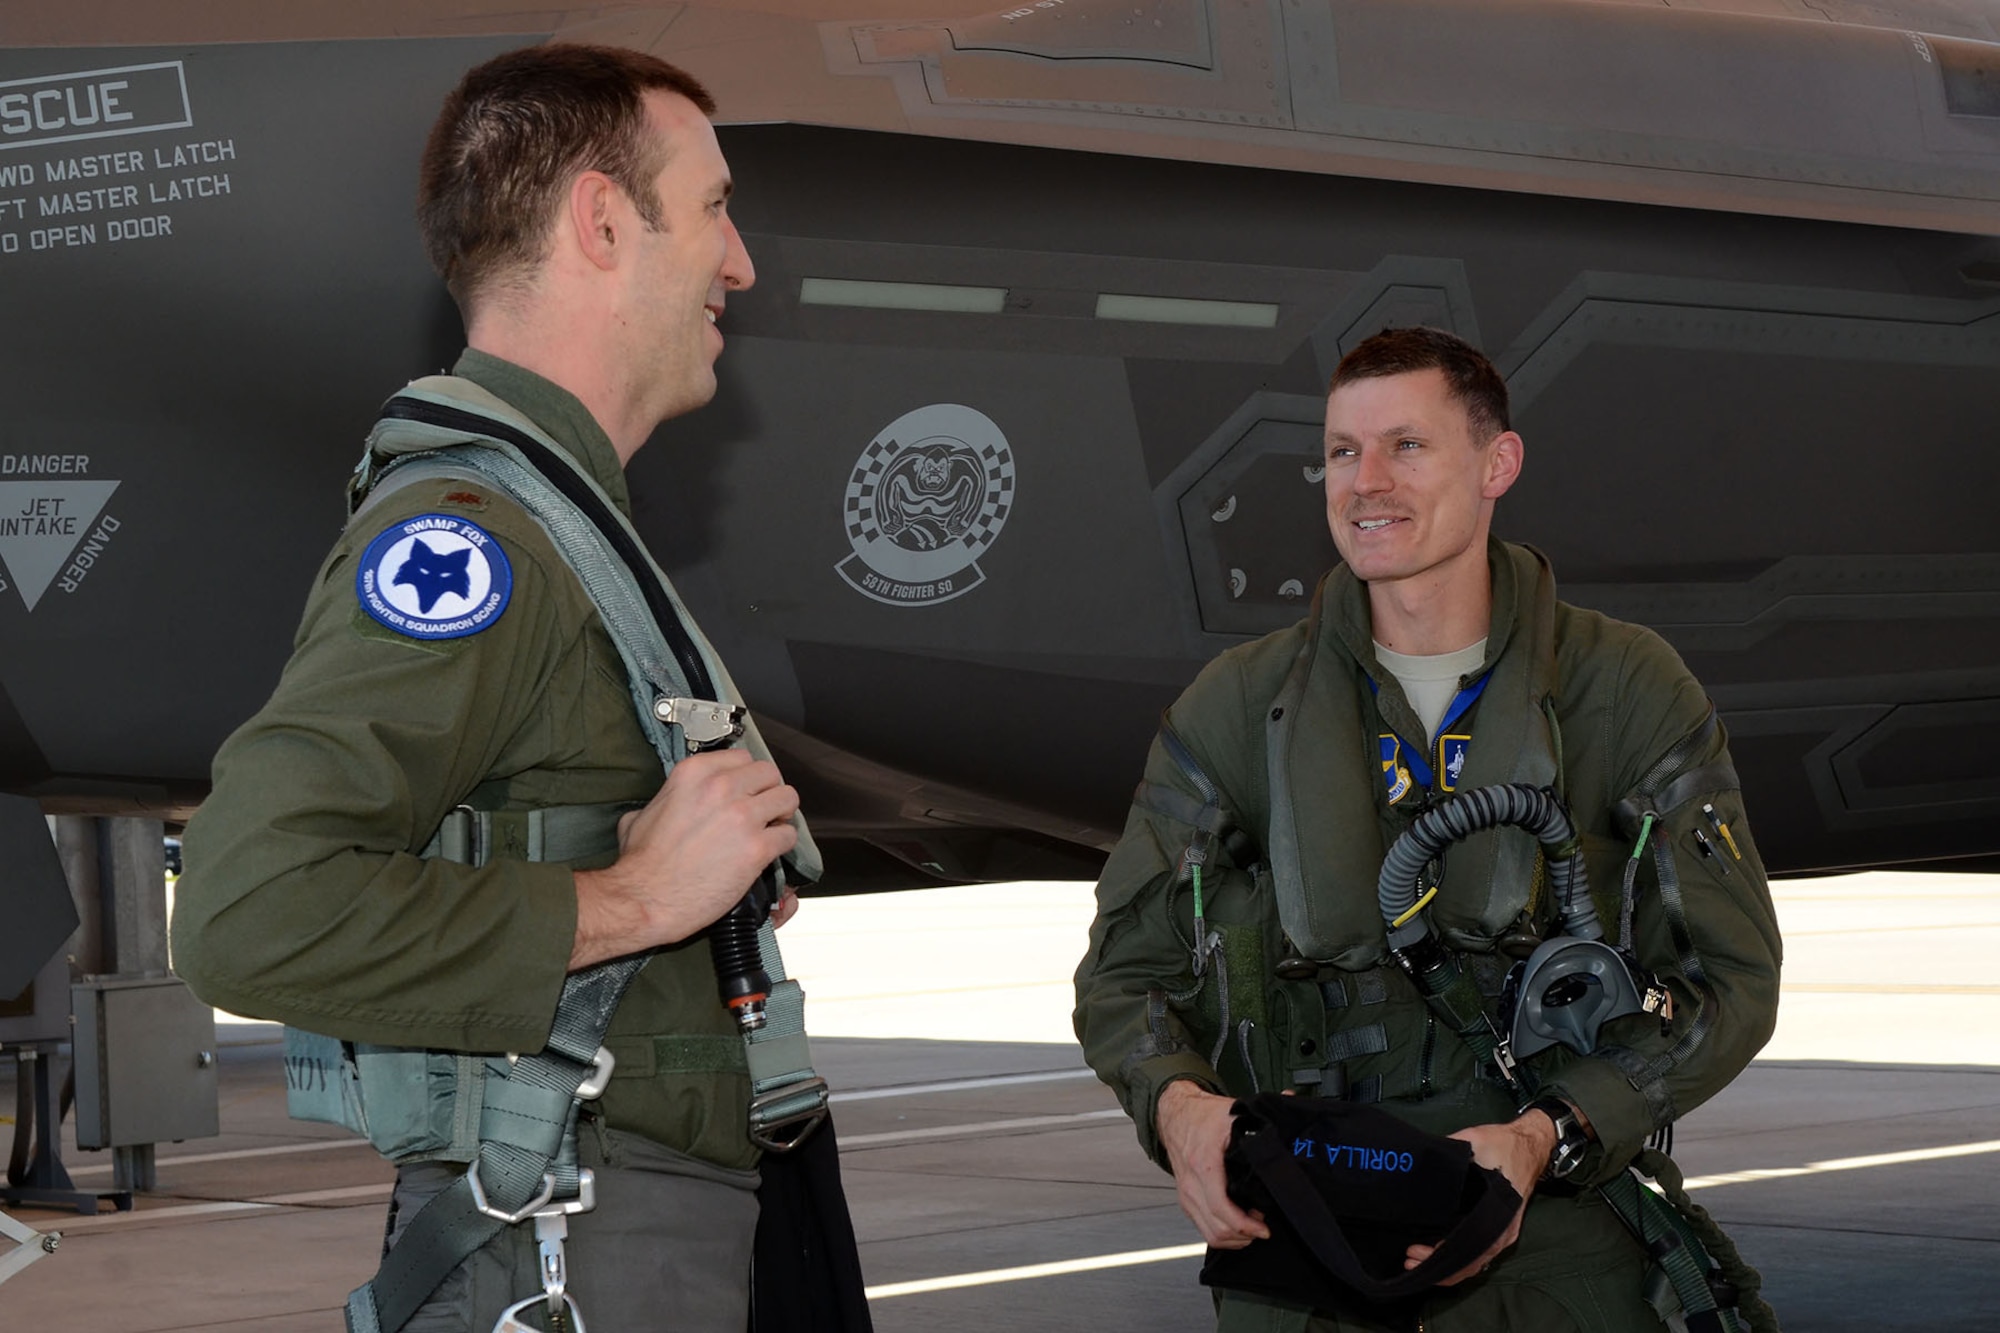 U.S. Air Force Lt. Col. Jon Snyder, an F-35 Lightning II fighter pilot assigned to the 33rd Fighter Wing from Eglin Air Force Base, Fla., is greeted by Maj. Justin Mock, an F-16 Fighting Falcon fighter pilot assigned to the 169th Fighter Wing of the South Carolina Air National Guard, at McEntire Joint National Guard Base, S.C., March 22, 2016.  The pilots conducted 4th and 5th generation integration fighter training, during local training missions, Mar. 21st and 22nd. (U.S. Air National Guard photo by Senior Airman Ashleigh Pavelek)